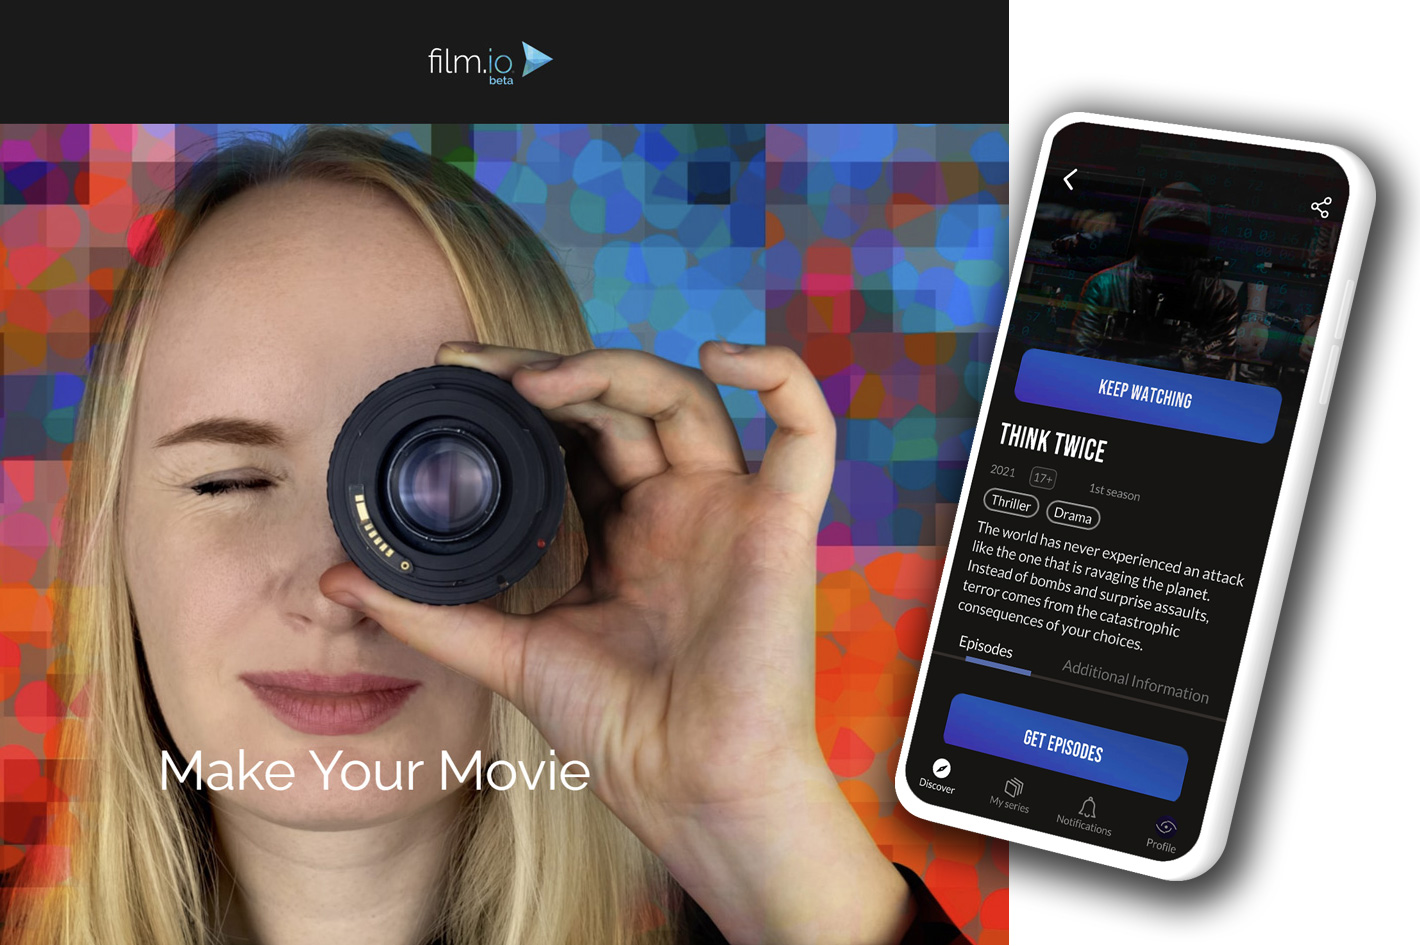 Film.io and Serialify aim to democratize the film industry